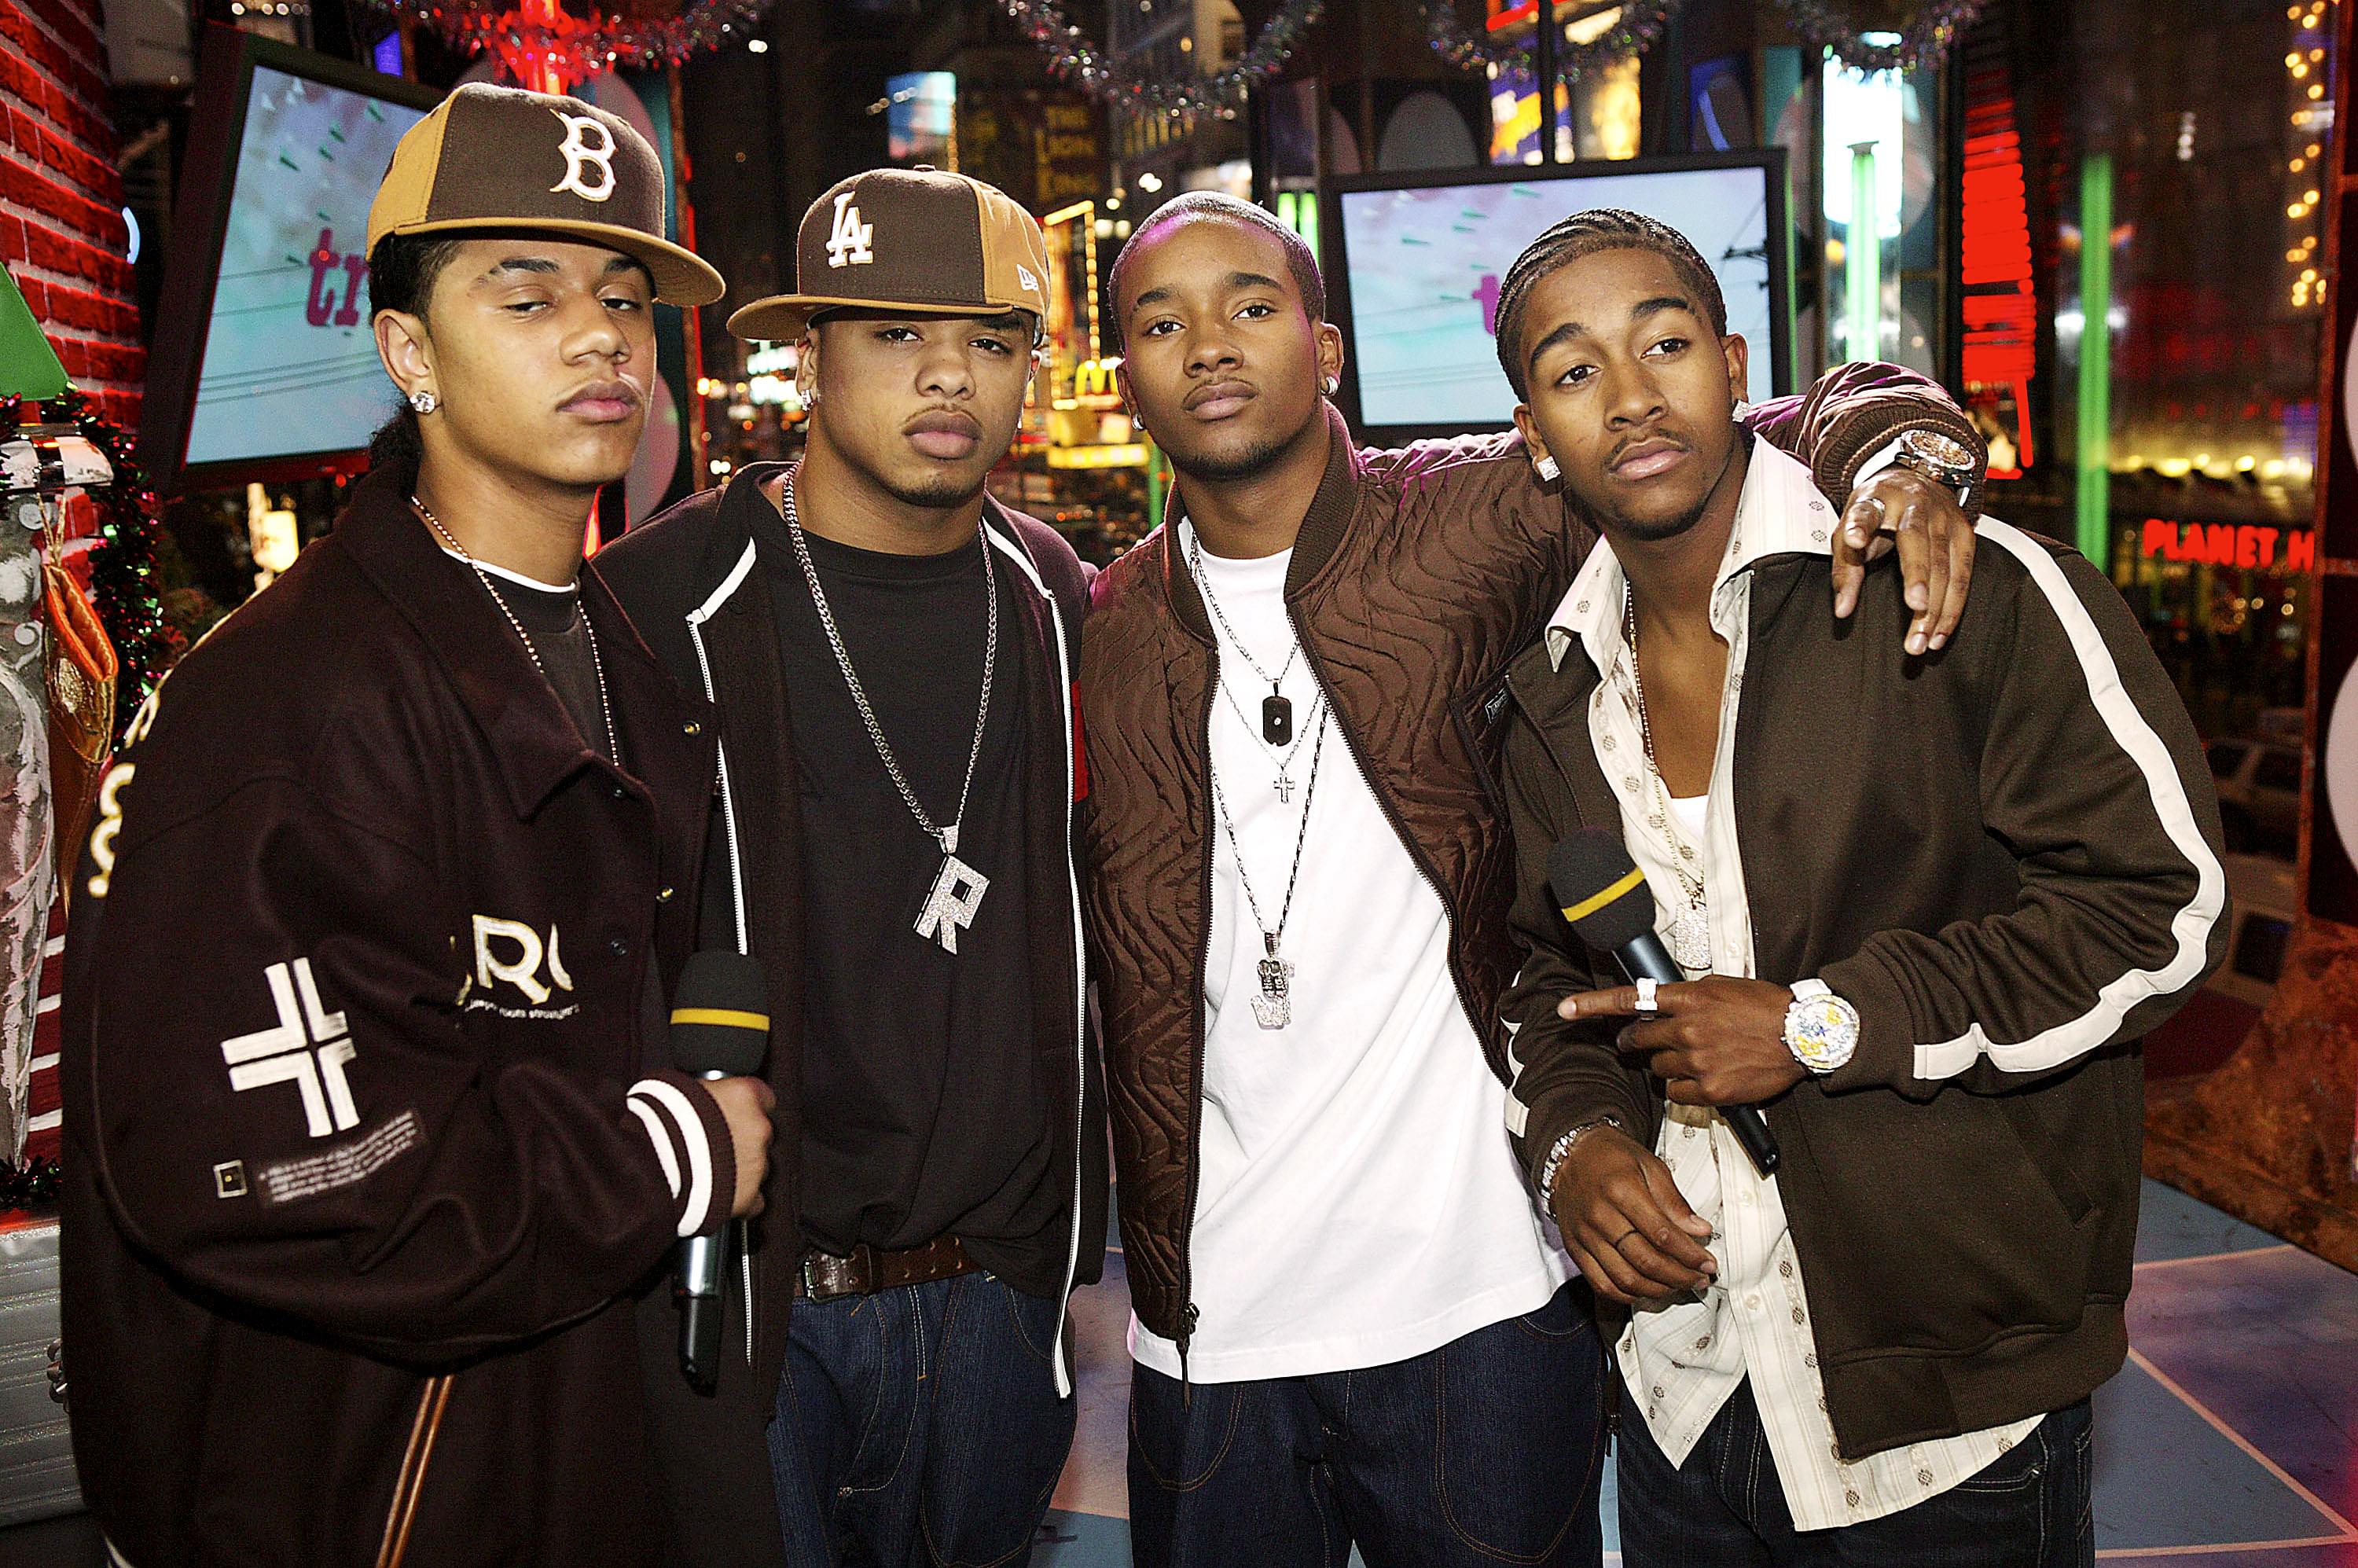 B2K Will Be “Retiring” All R-Kelly-Written Songs After Reunion Tour, According To Omarion